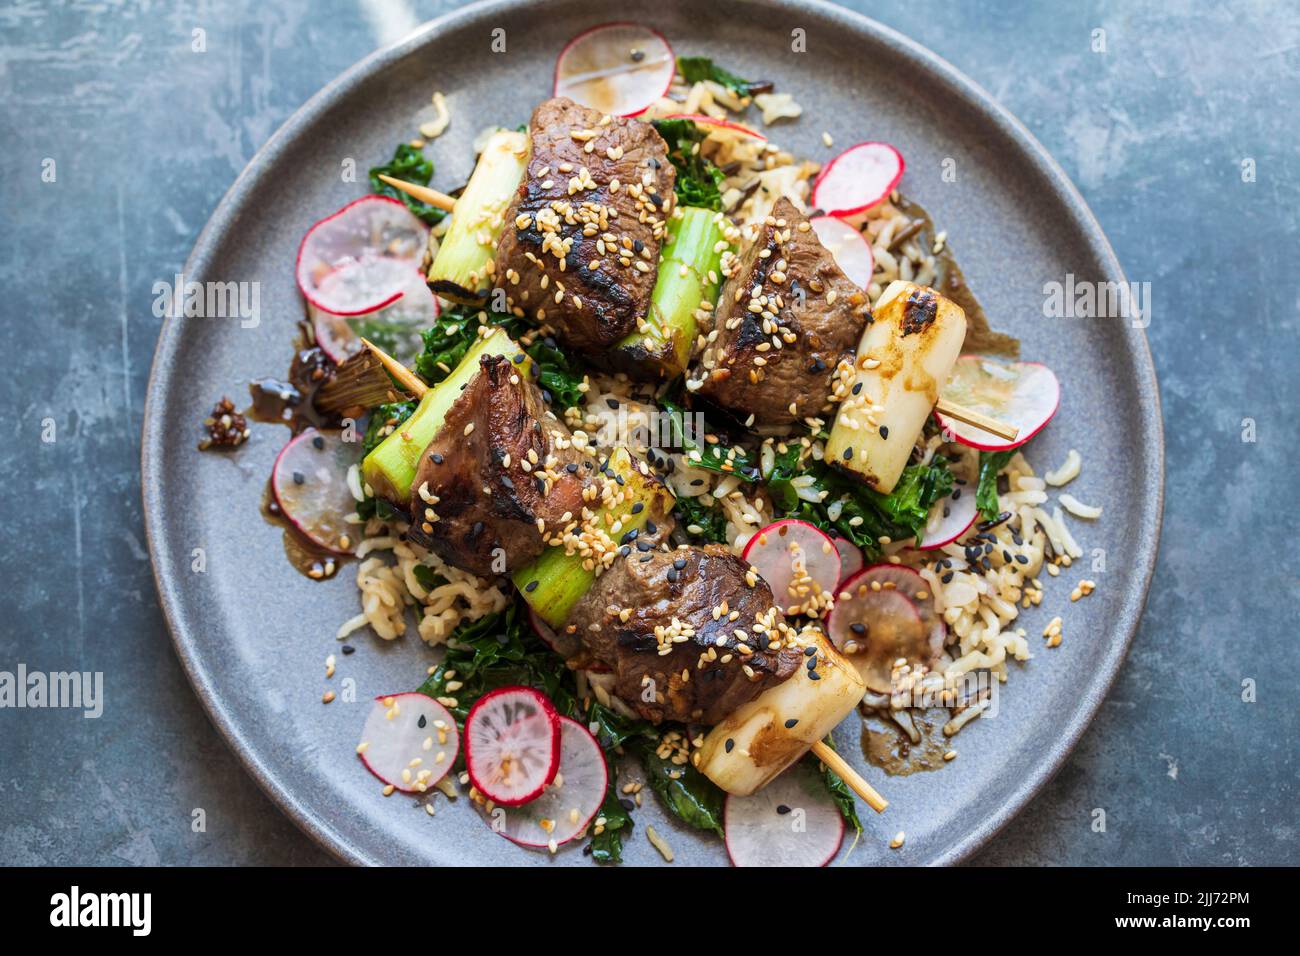 Beef steak skewers with rice, kale and radishes Stock Photo